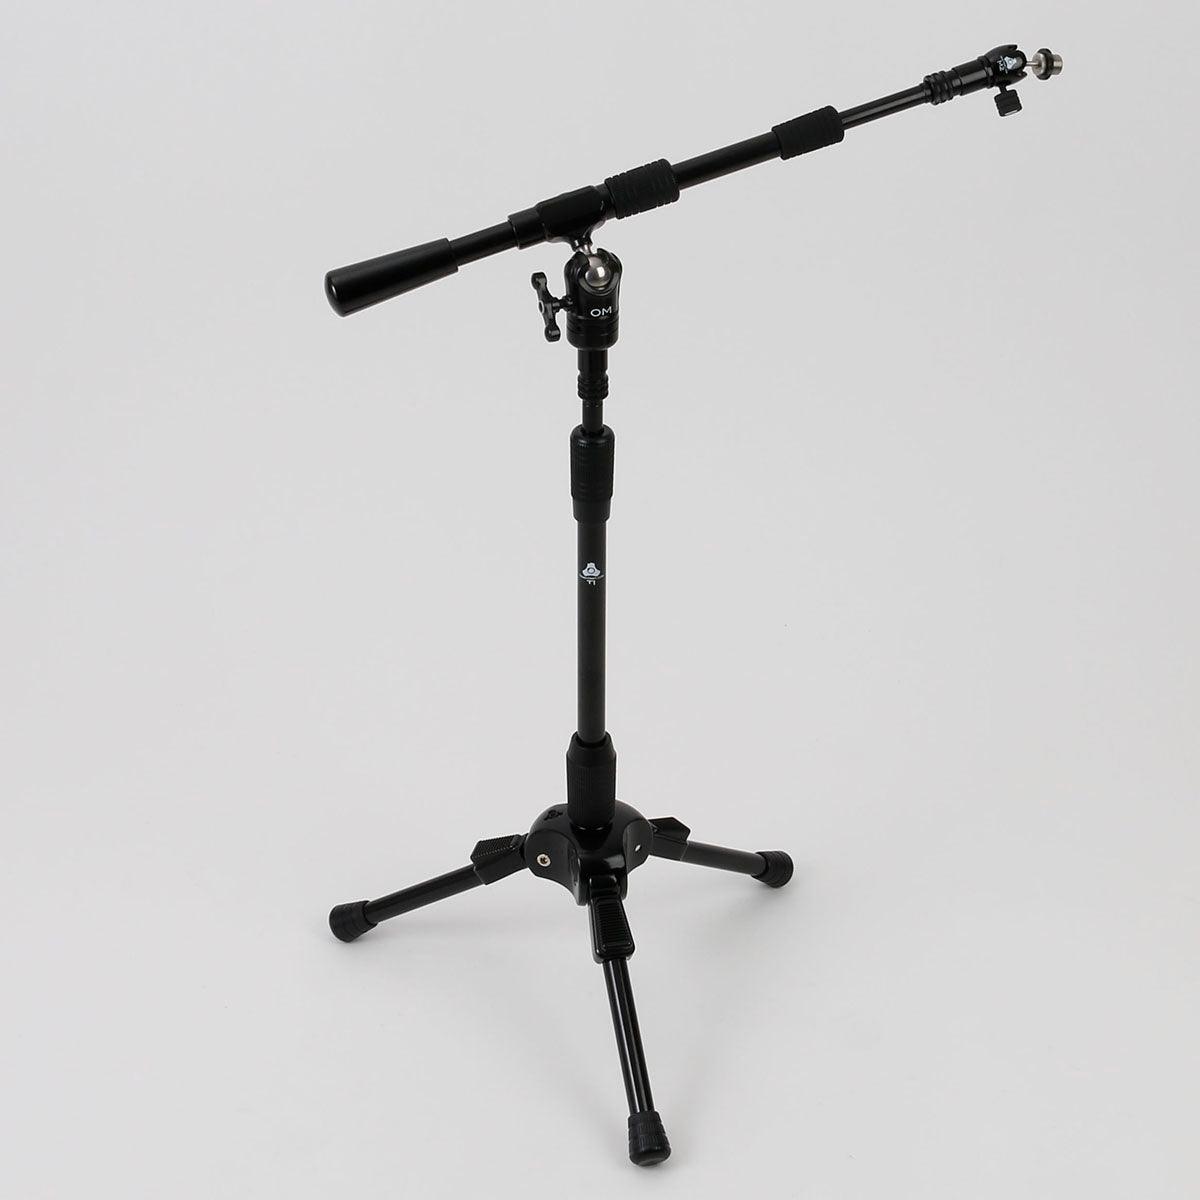 Triad-Orbit Short Tripod Stand System including: (1) T1, (1) OM, and (1) M2